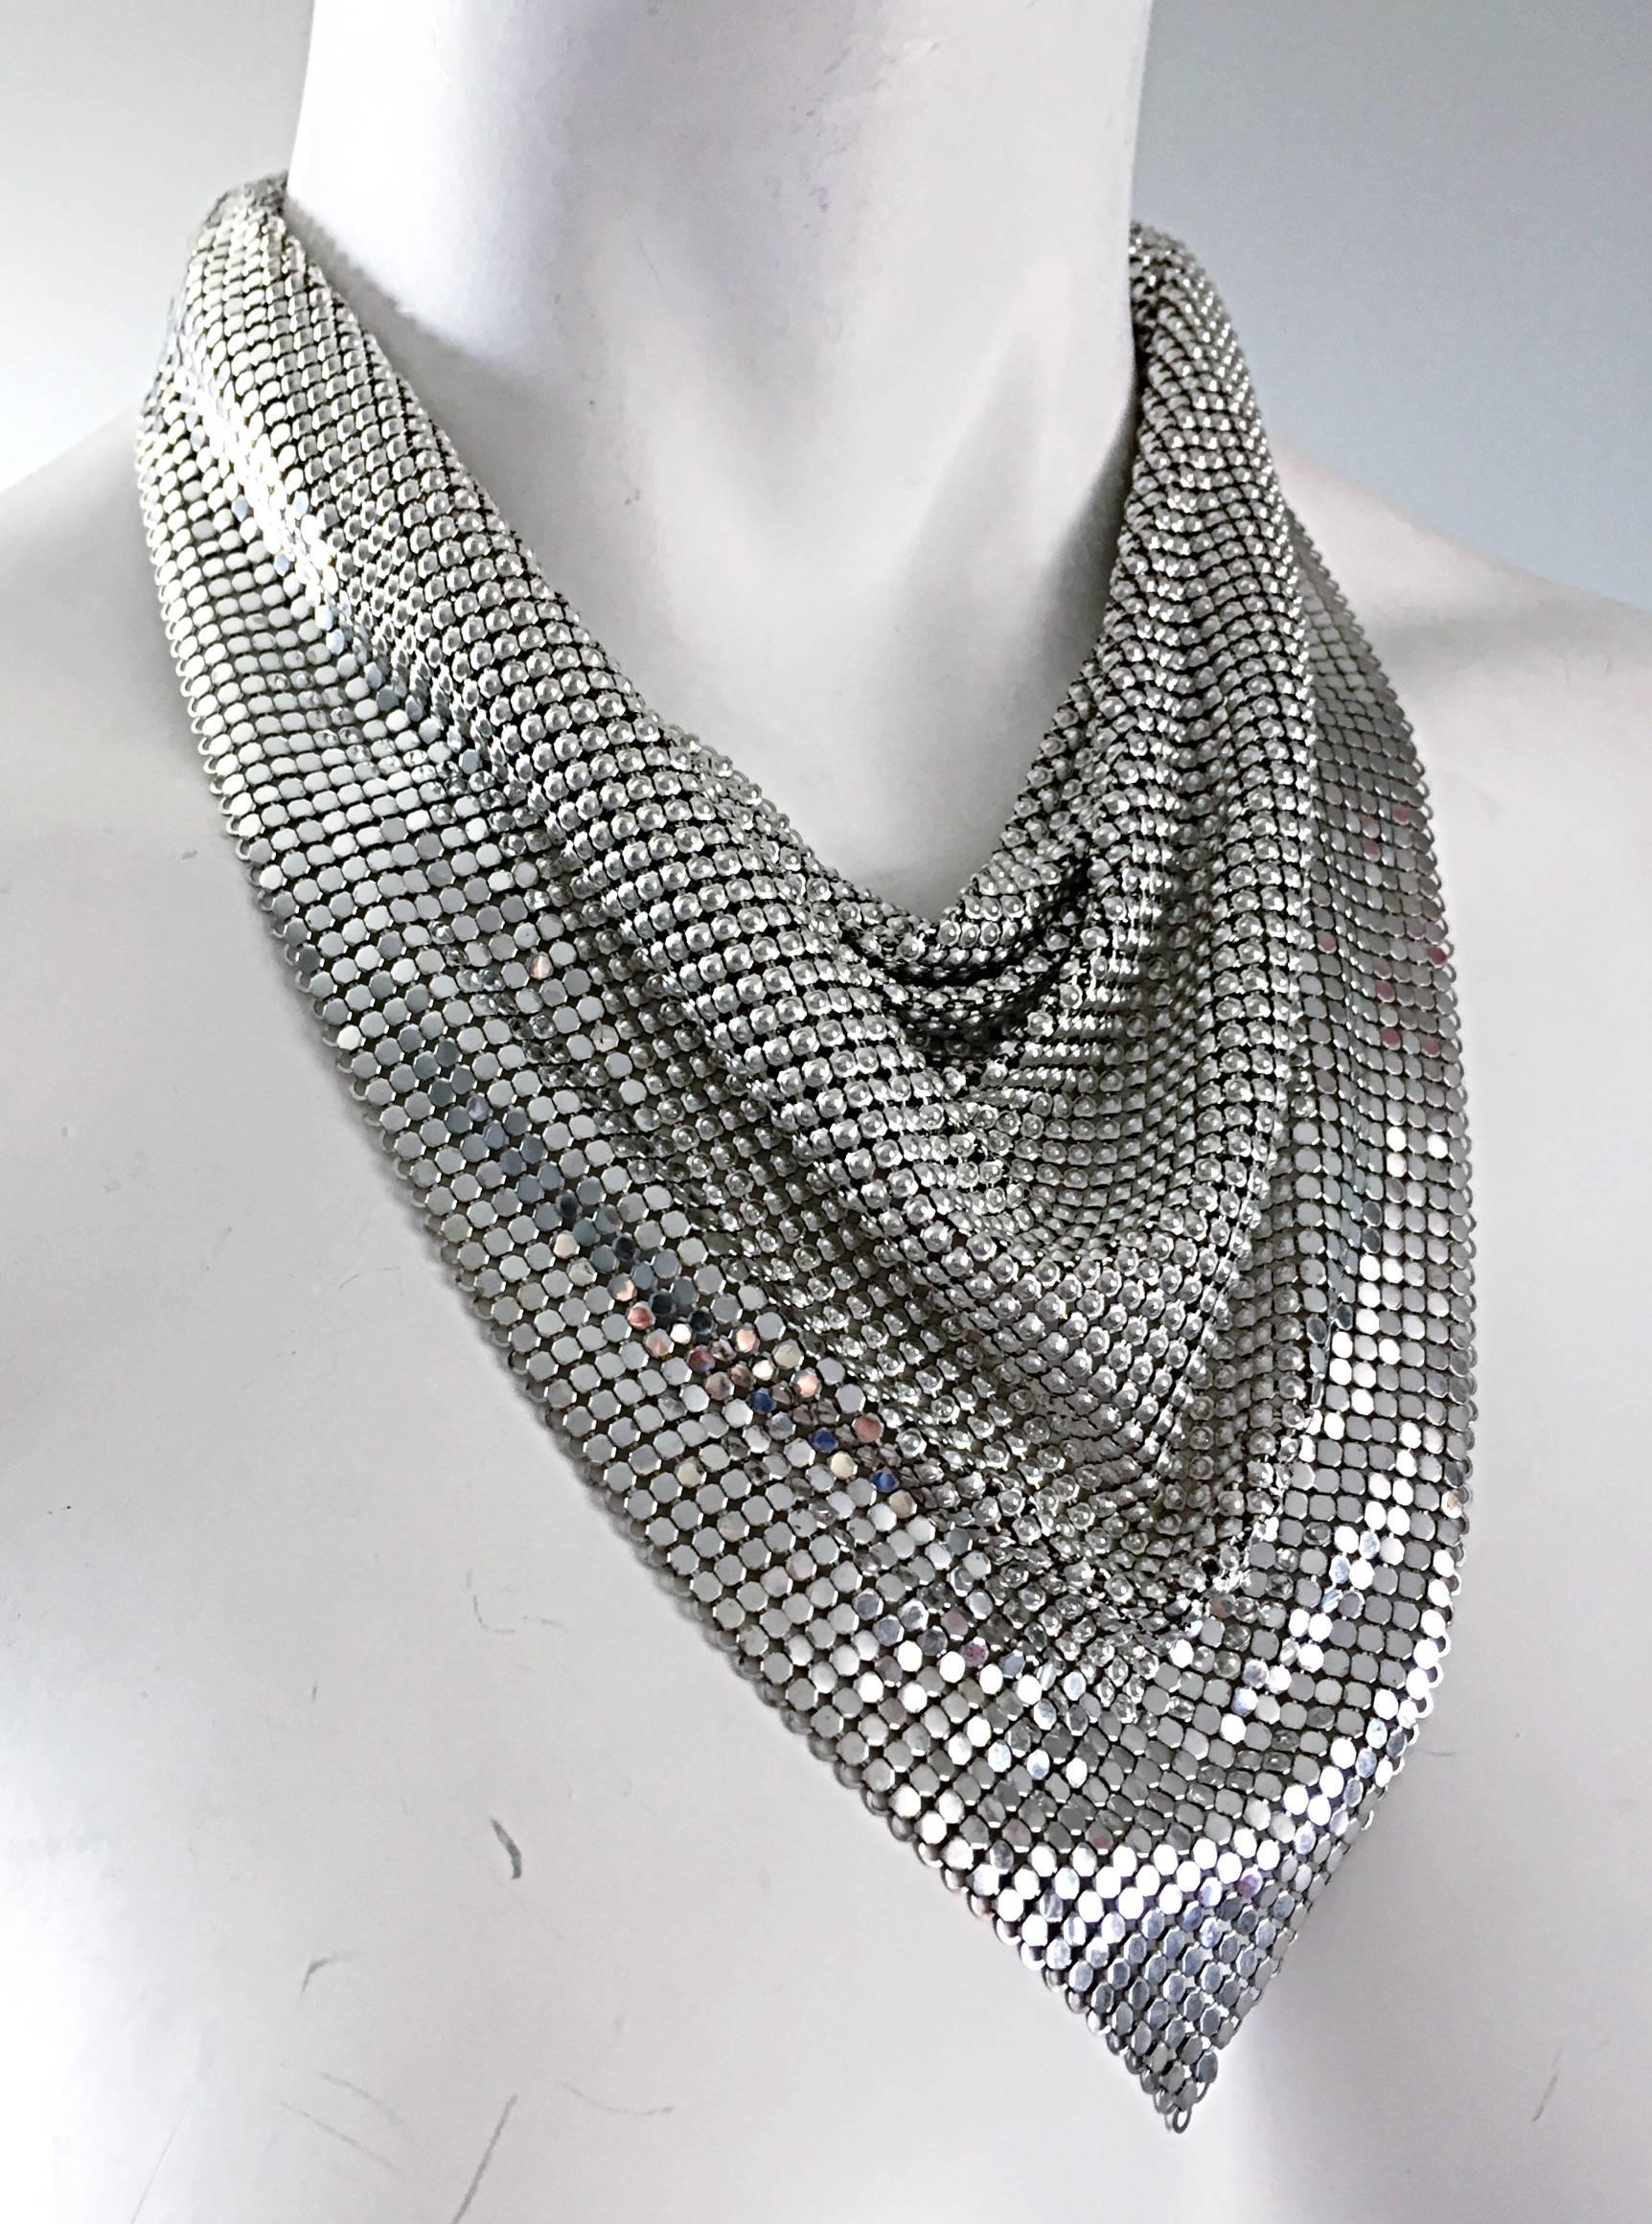 Rare vintage 1970s WHITING & DAVIS silver chainmail bib necklace / choker! Features all over silver metal mesh in a triangular shape. Can be worn for multiple occasions, and can easily be dressed up or down. Perfect with the 70s Samir blue metallic